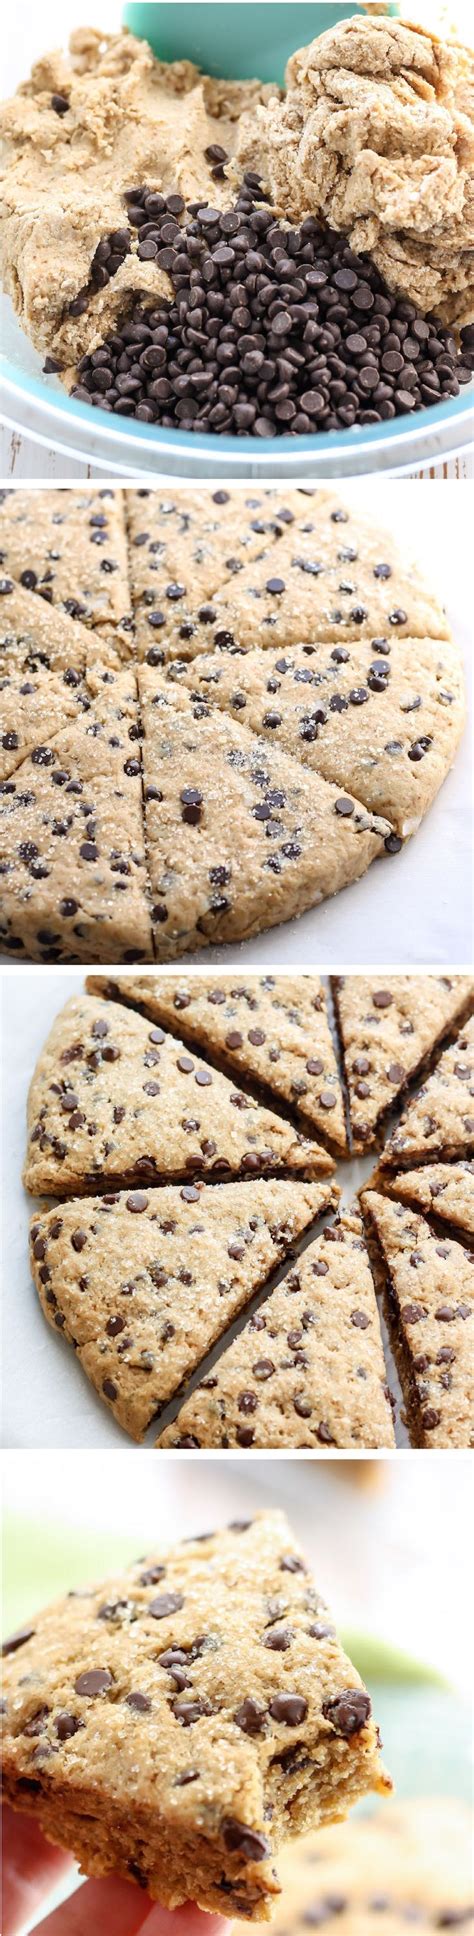 These Vegan Whole Wheat Chocolate Chip Scones Have The Perfect